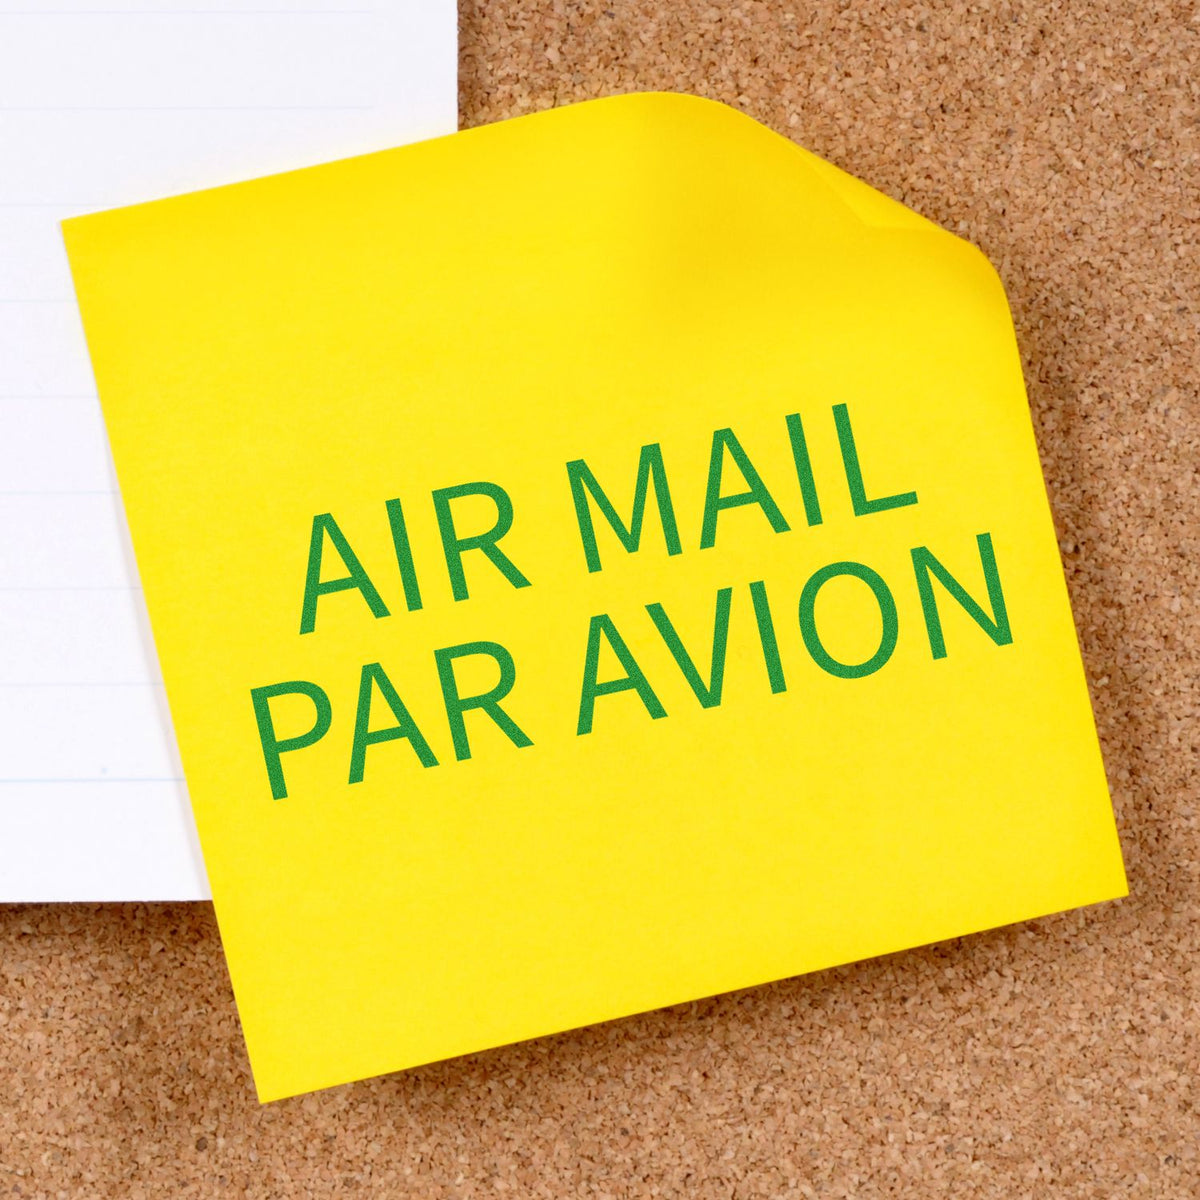 Air Mail Par Avion Rubber Stamp In Use